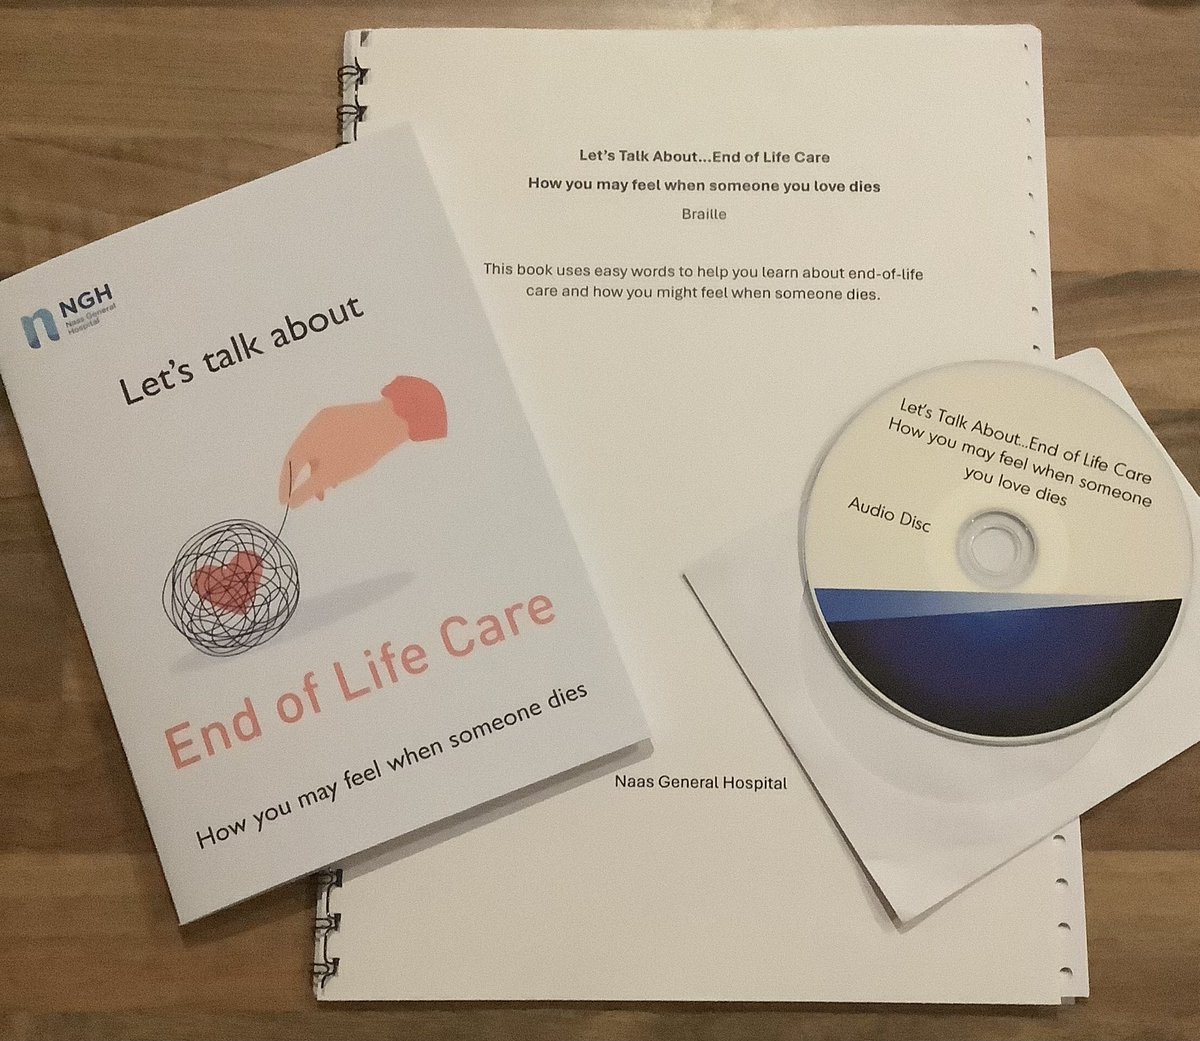 NGH coproduction with @NghSearch on an easy read booklet sharing about dying, death & bereavement of a loved one to persons with intellectual disabilities.

@nghsearch interns guided us in the use of language for this tender discussion.

Also available in braille & as an audio 1/